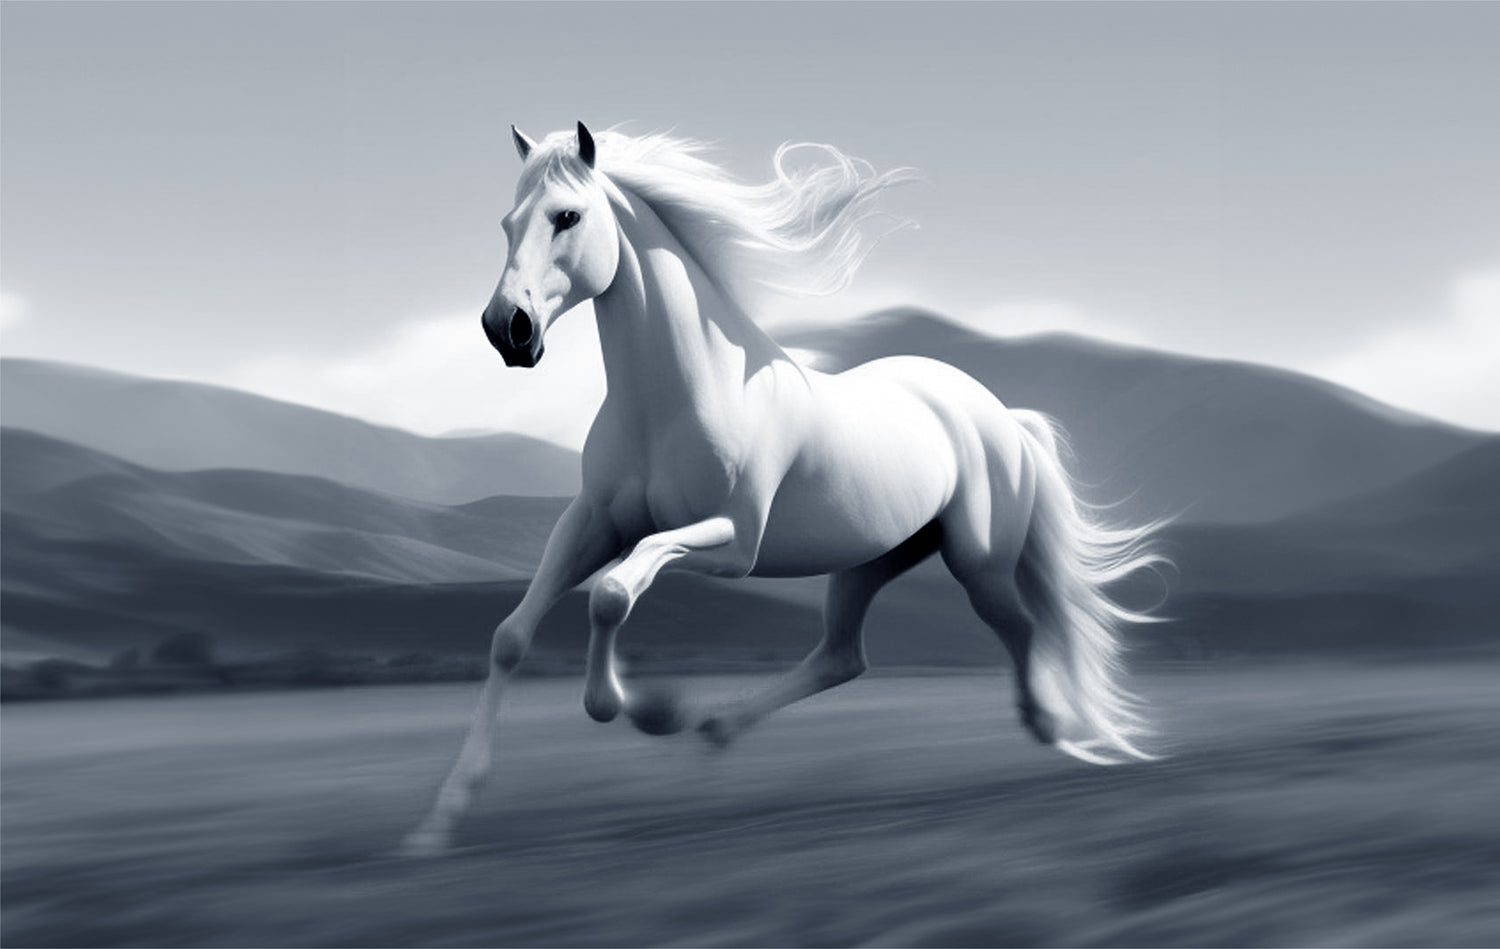 A White wildhorse running free in an untocued meadow, pure just as she is. #Wildhorses #BlackandWhite